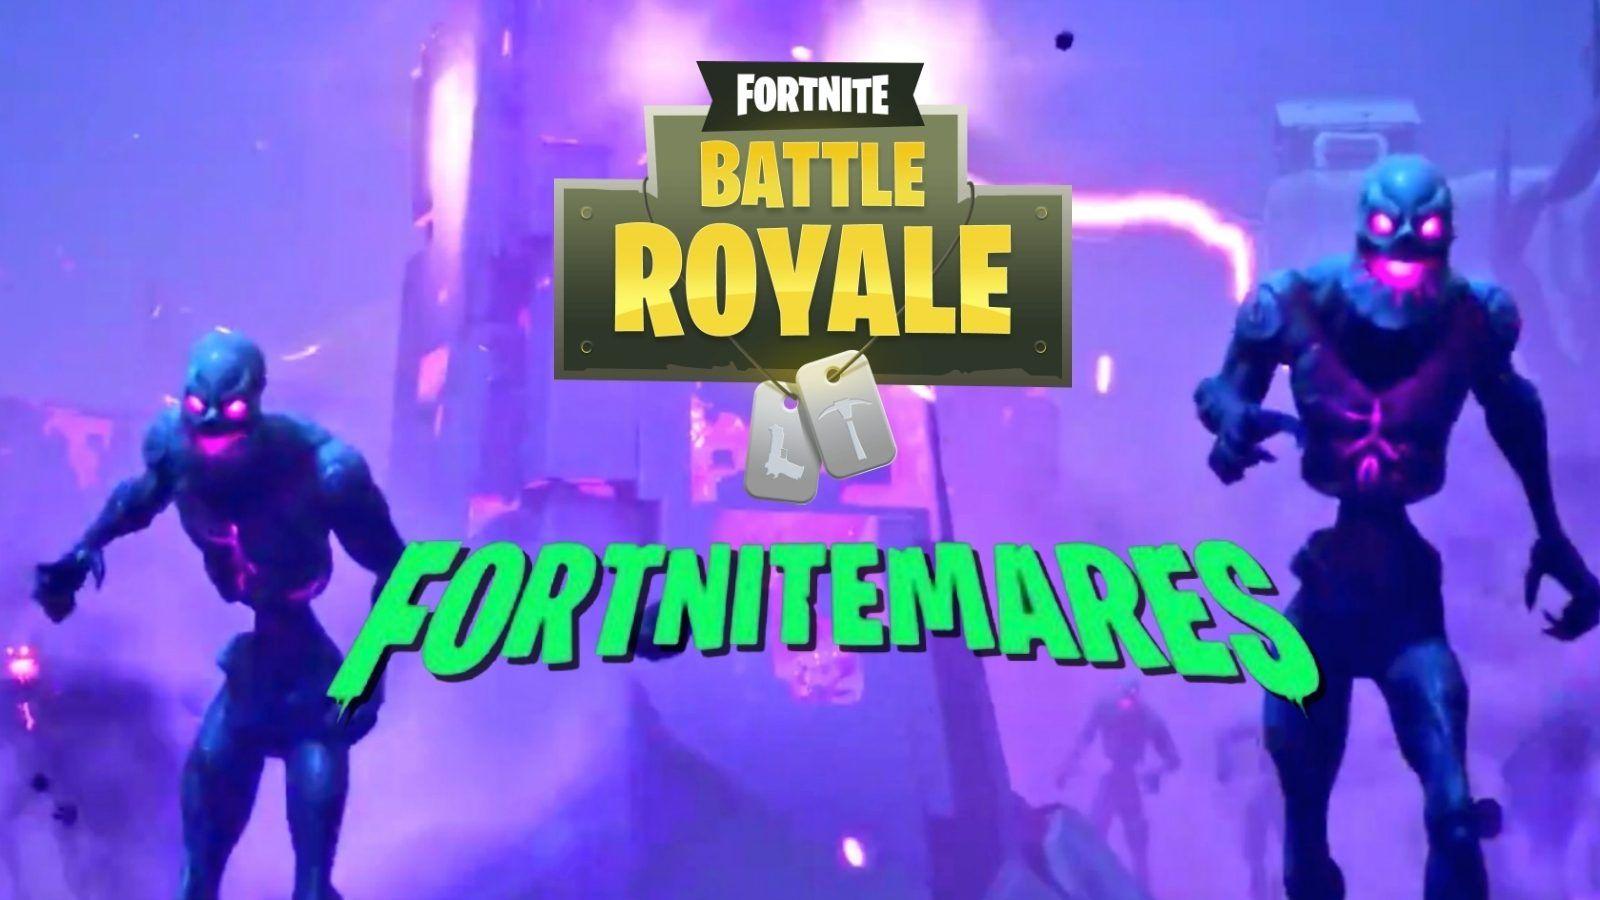 Cube unleashes Zombies in Fortnite Battle Royale called 'Cube